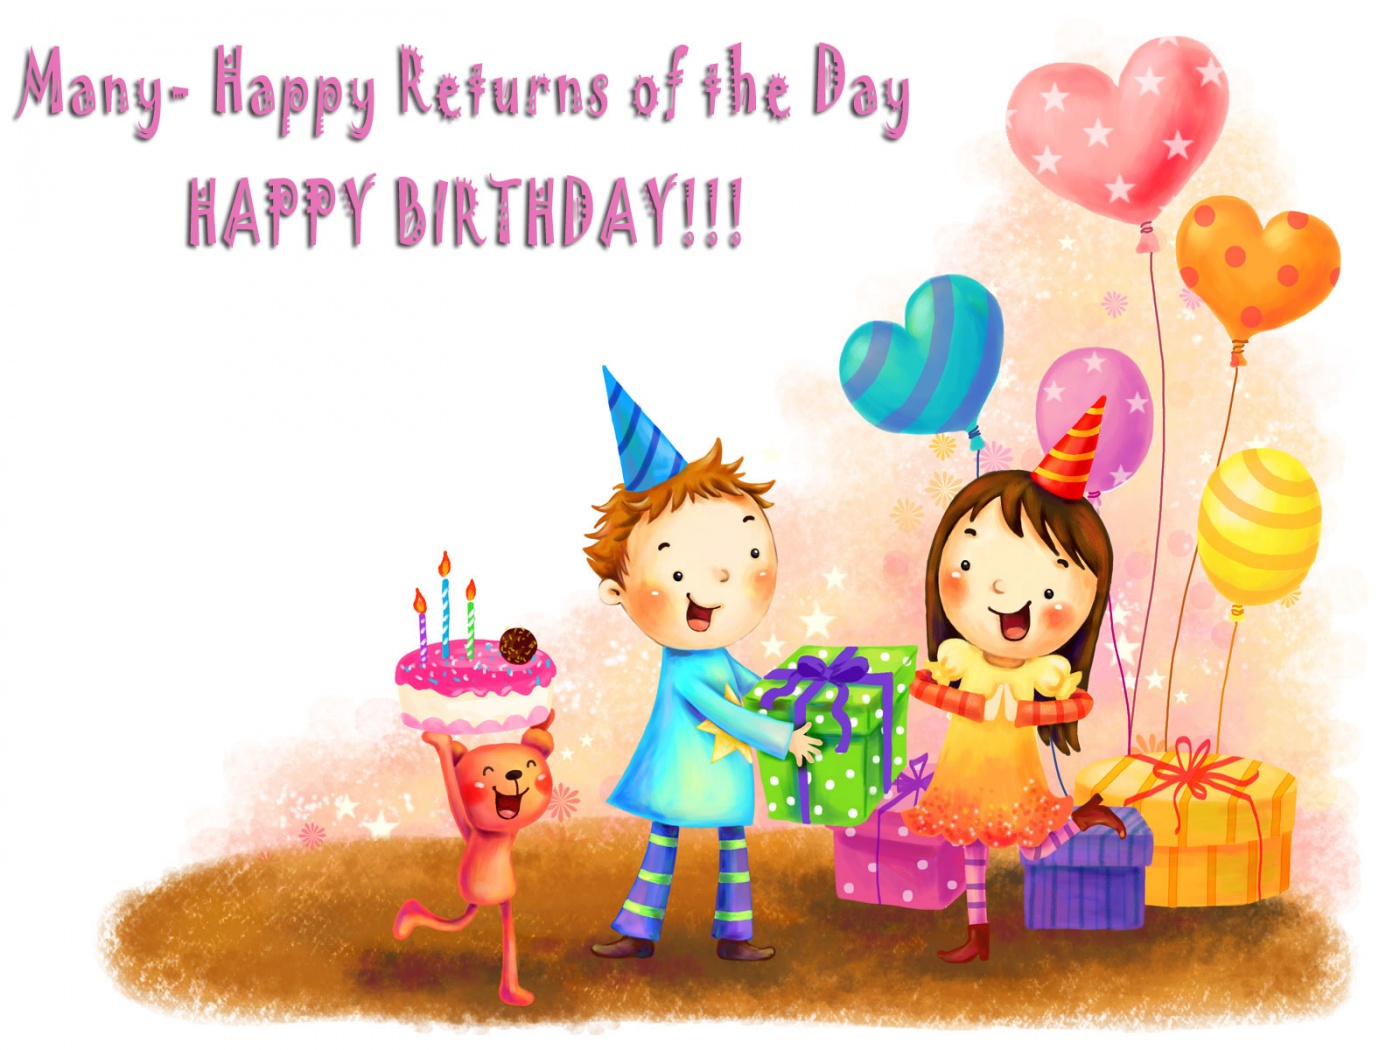 happy birthday sister greeting cards hd wishes wallpapers free Hot